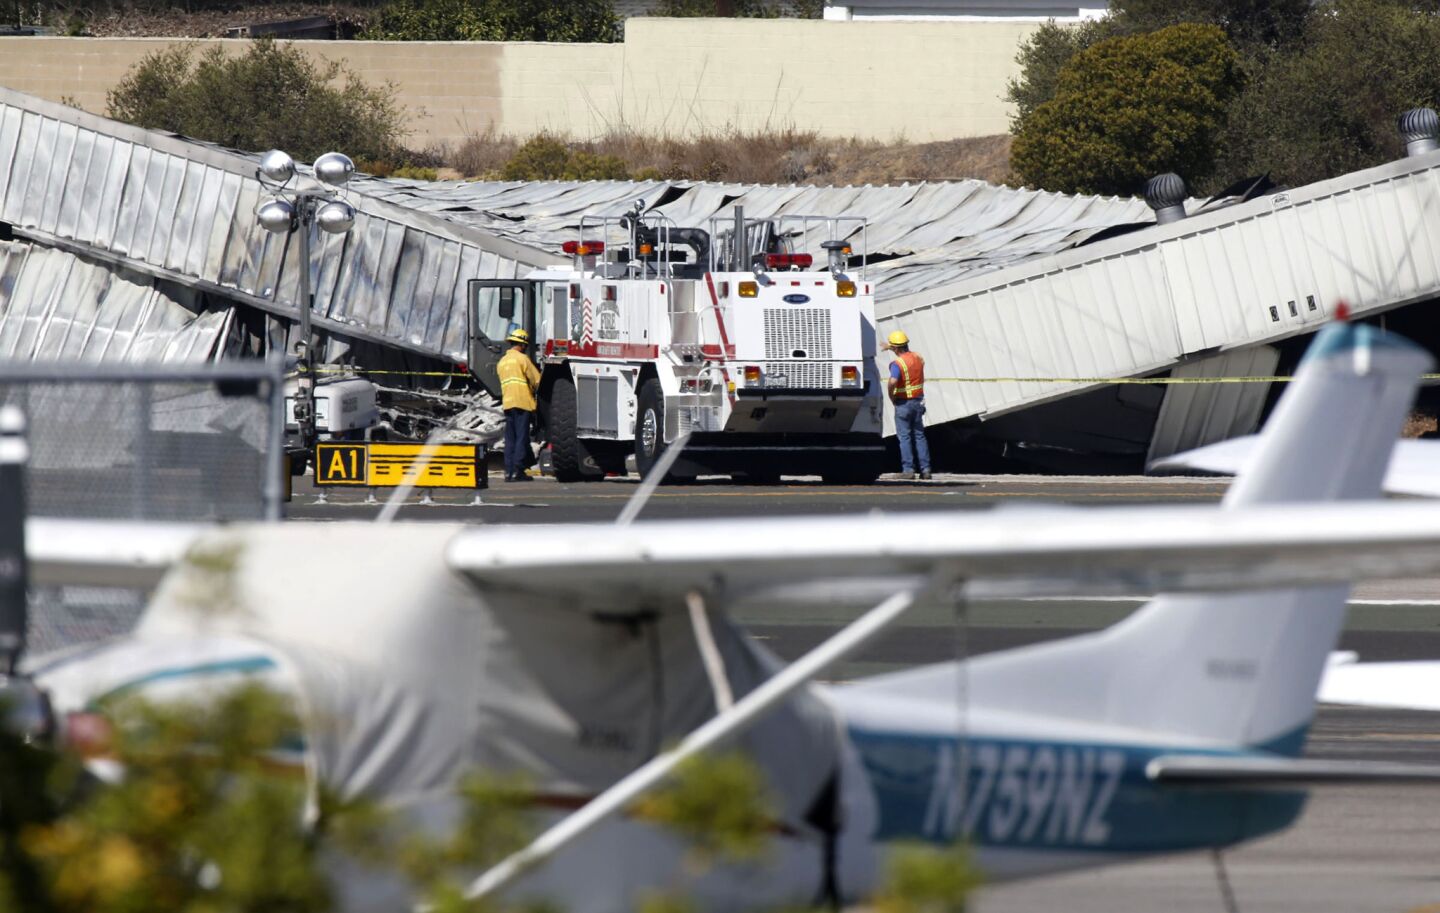 Santa Monica firefighters monitor the collapsed aircraft hangar where a private jet crashed and burned Sunday evening at Santa Monica Airport. Investigators will have to lift the hangar's metal roof off the burned aircraft to determine how many bodies are inside.